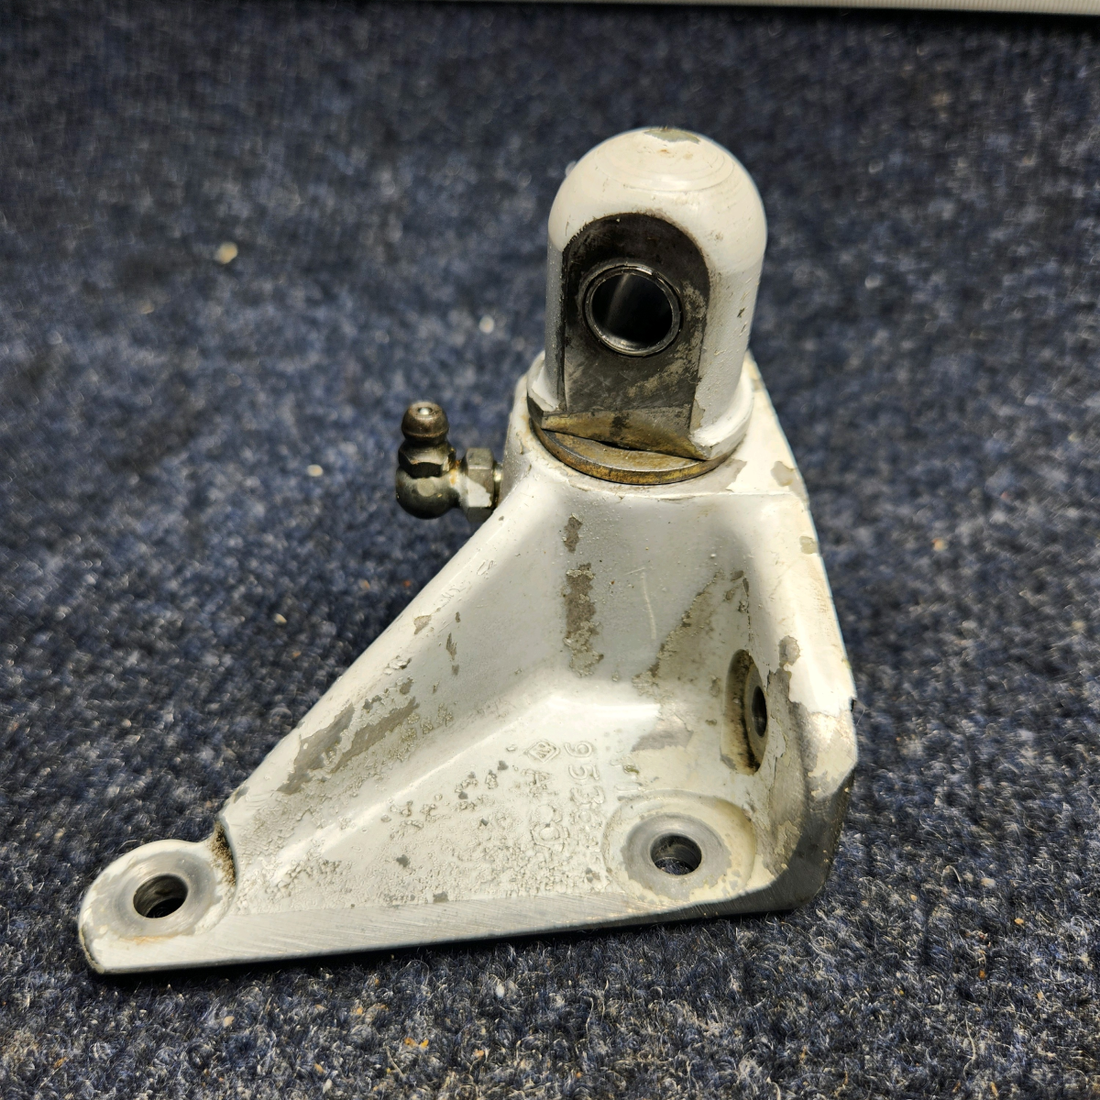 Used aircraft parts for sale, 95643-007 Piper PA32RT-300 MAIN GEAR TRUSS BRACKET ASSEMBLY RH (3/8")